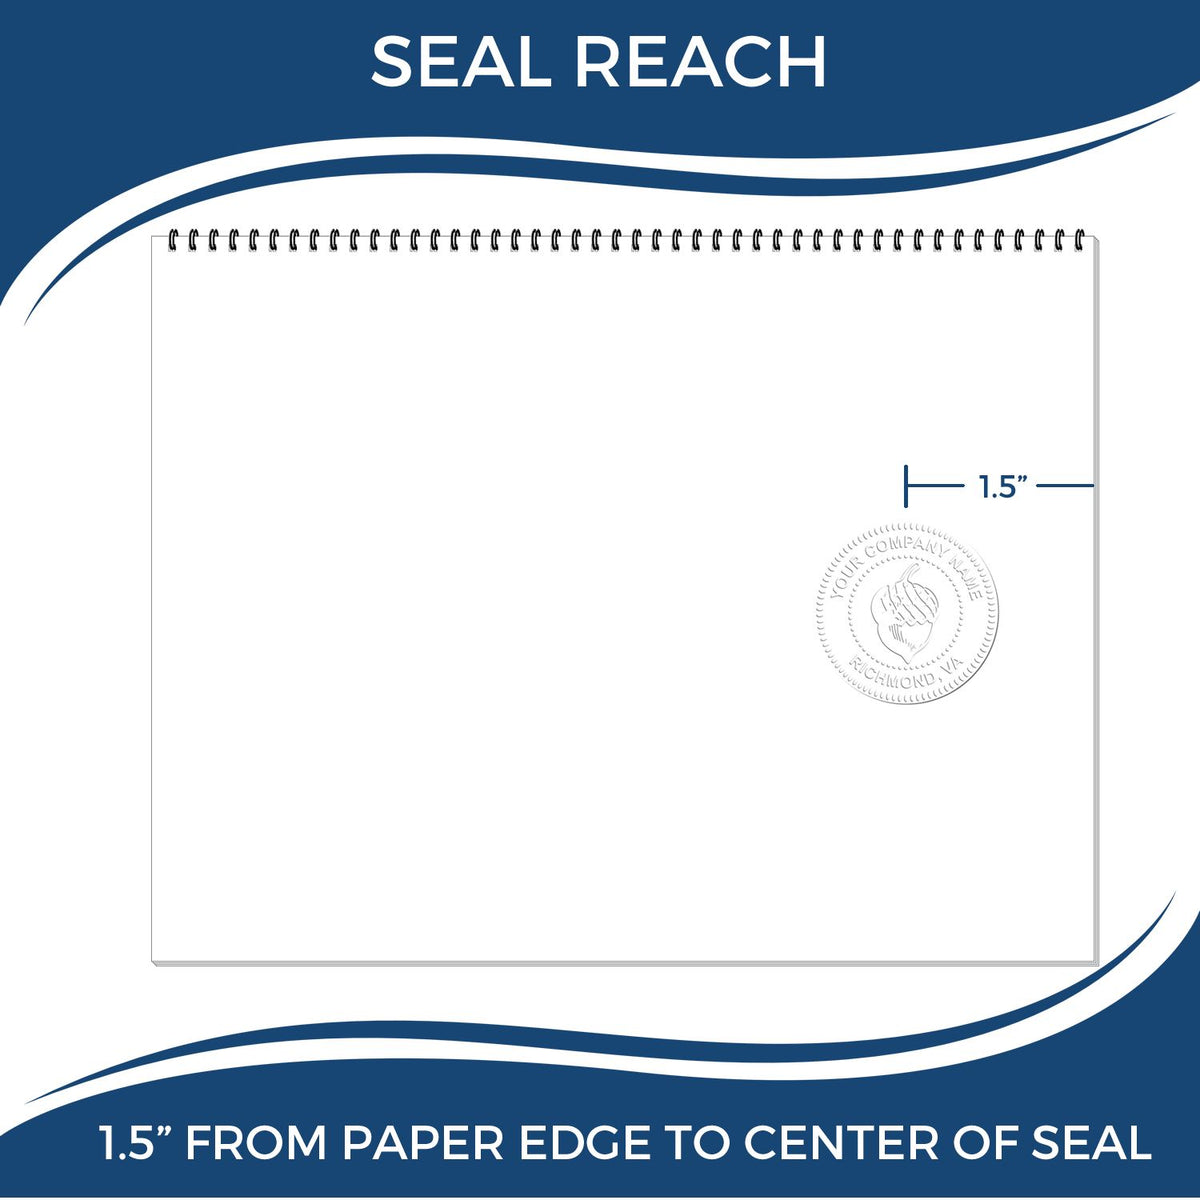 An infographic showing the seal reach which is represented by a ruler and a miniature seal image of the Handheld Indiana Professional Geologist Embosser